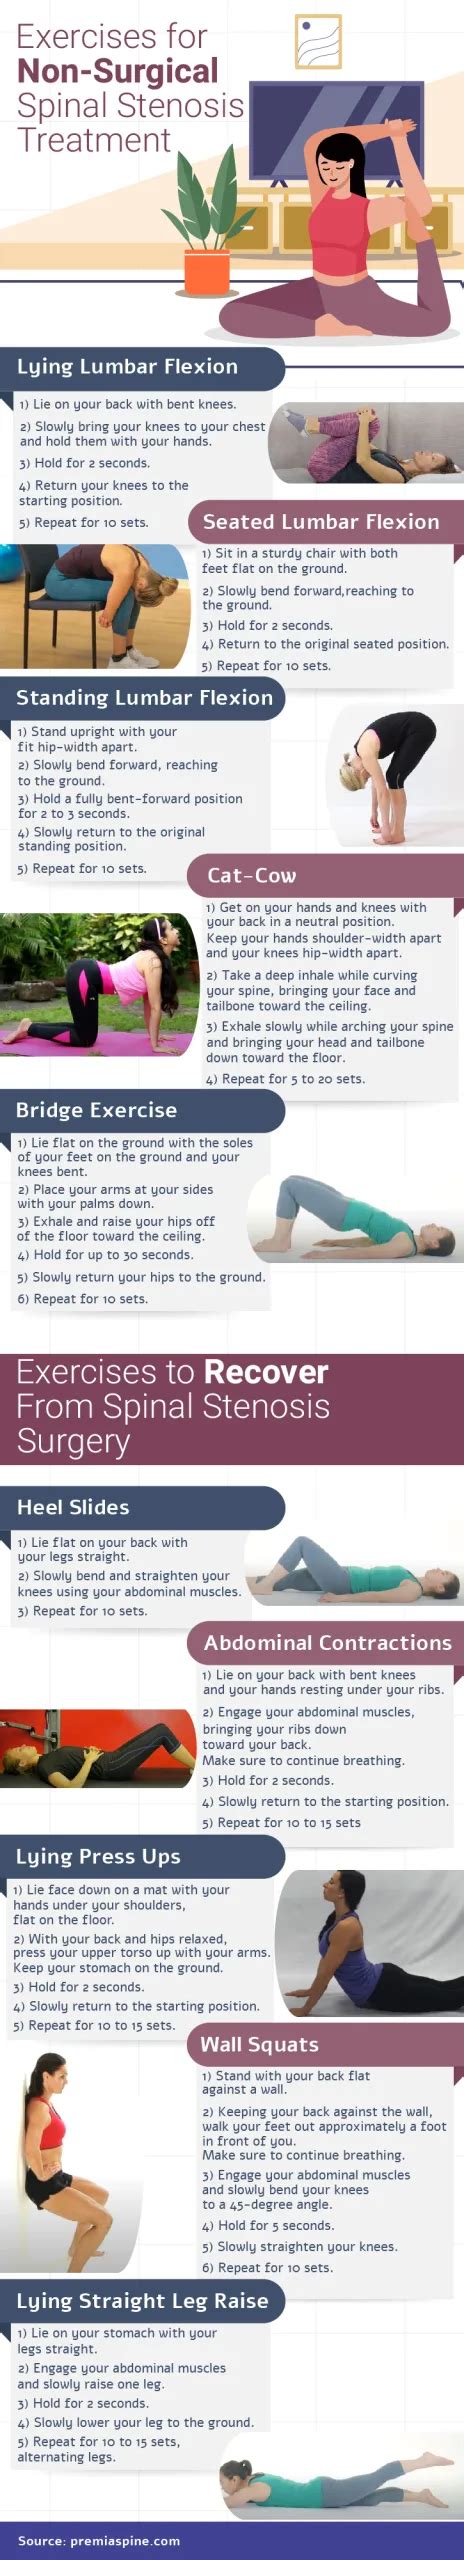 Spinal Stenosis Exercises | Premia Spine